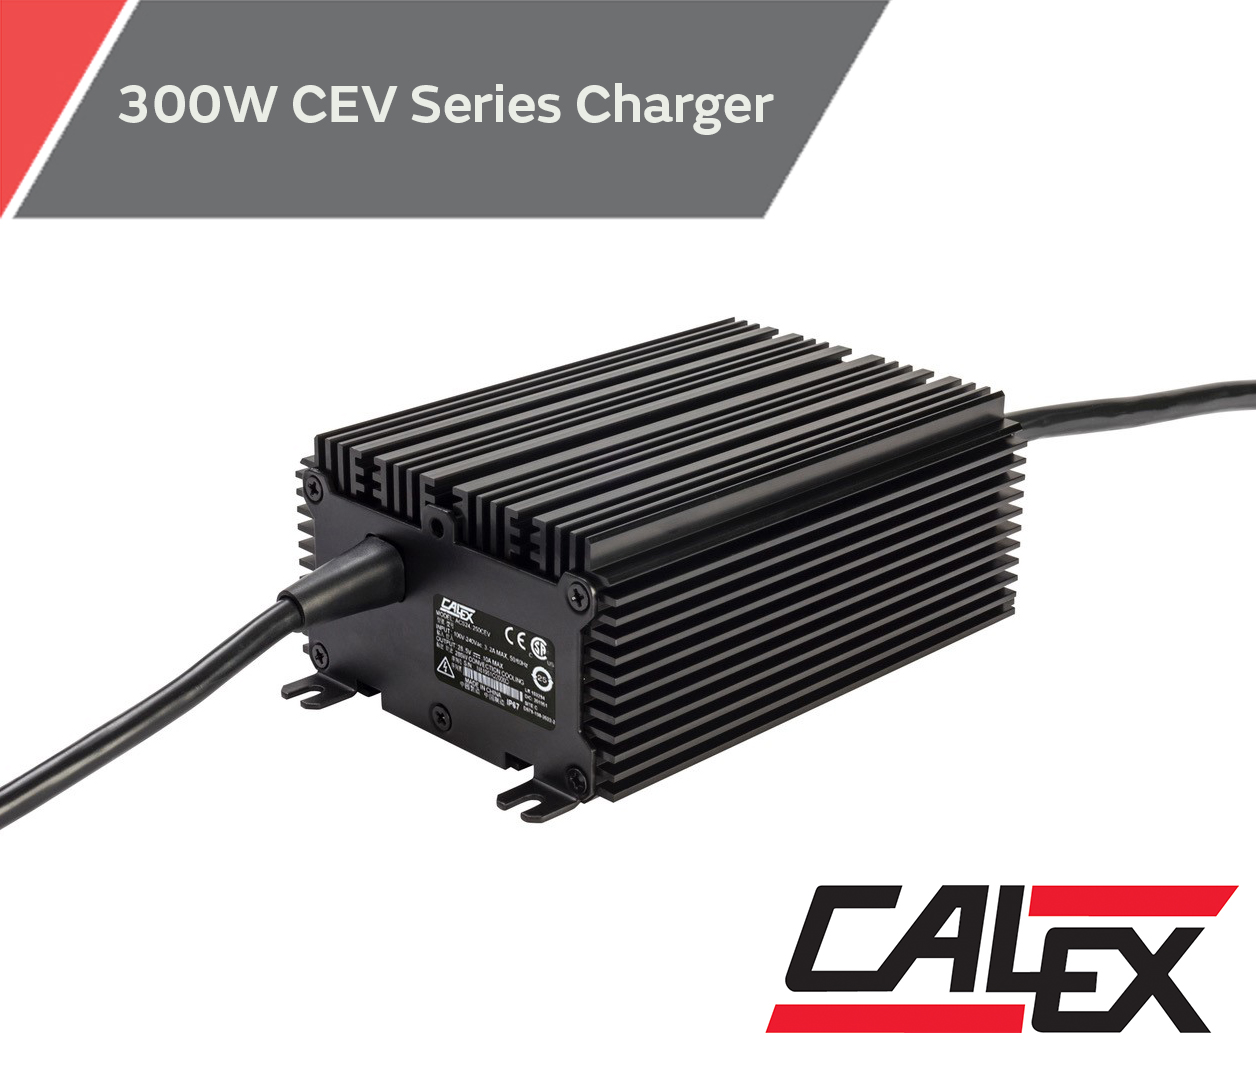  300W Li-ion Battery Charger for E-mobility Applications